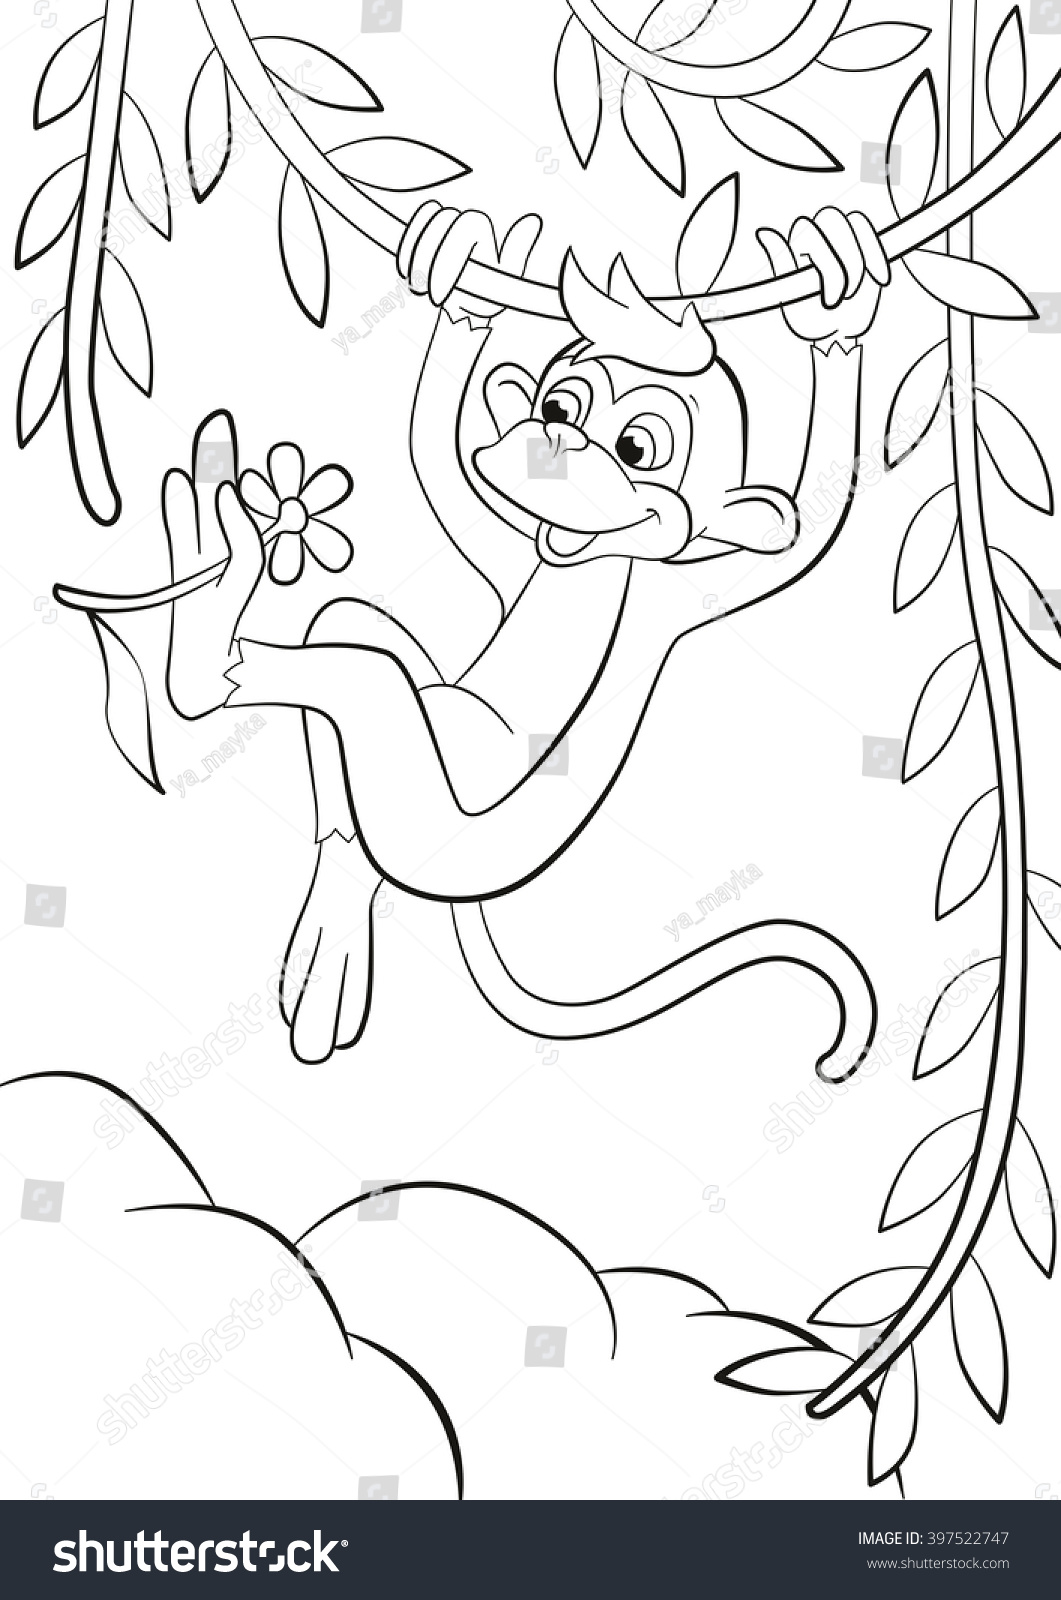 Coloring pages Little cute monkey is hanging on the tree branch smiling and pointing